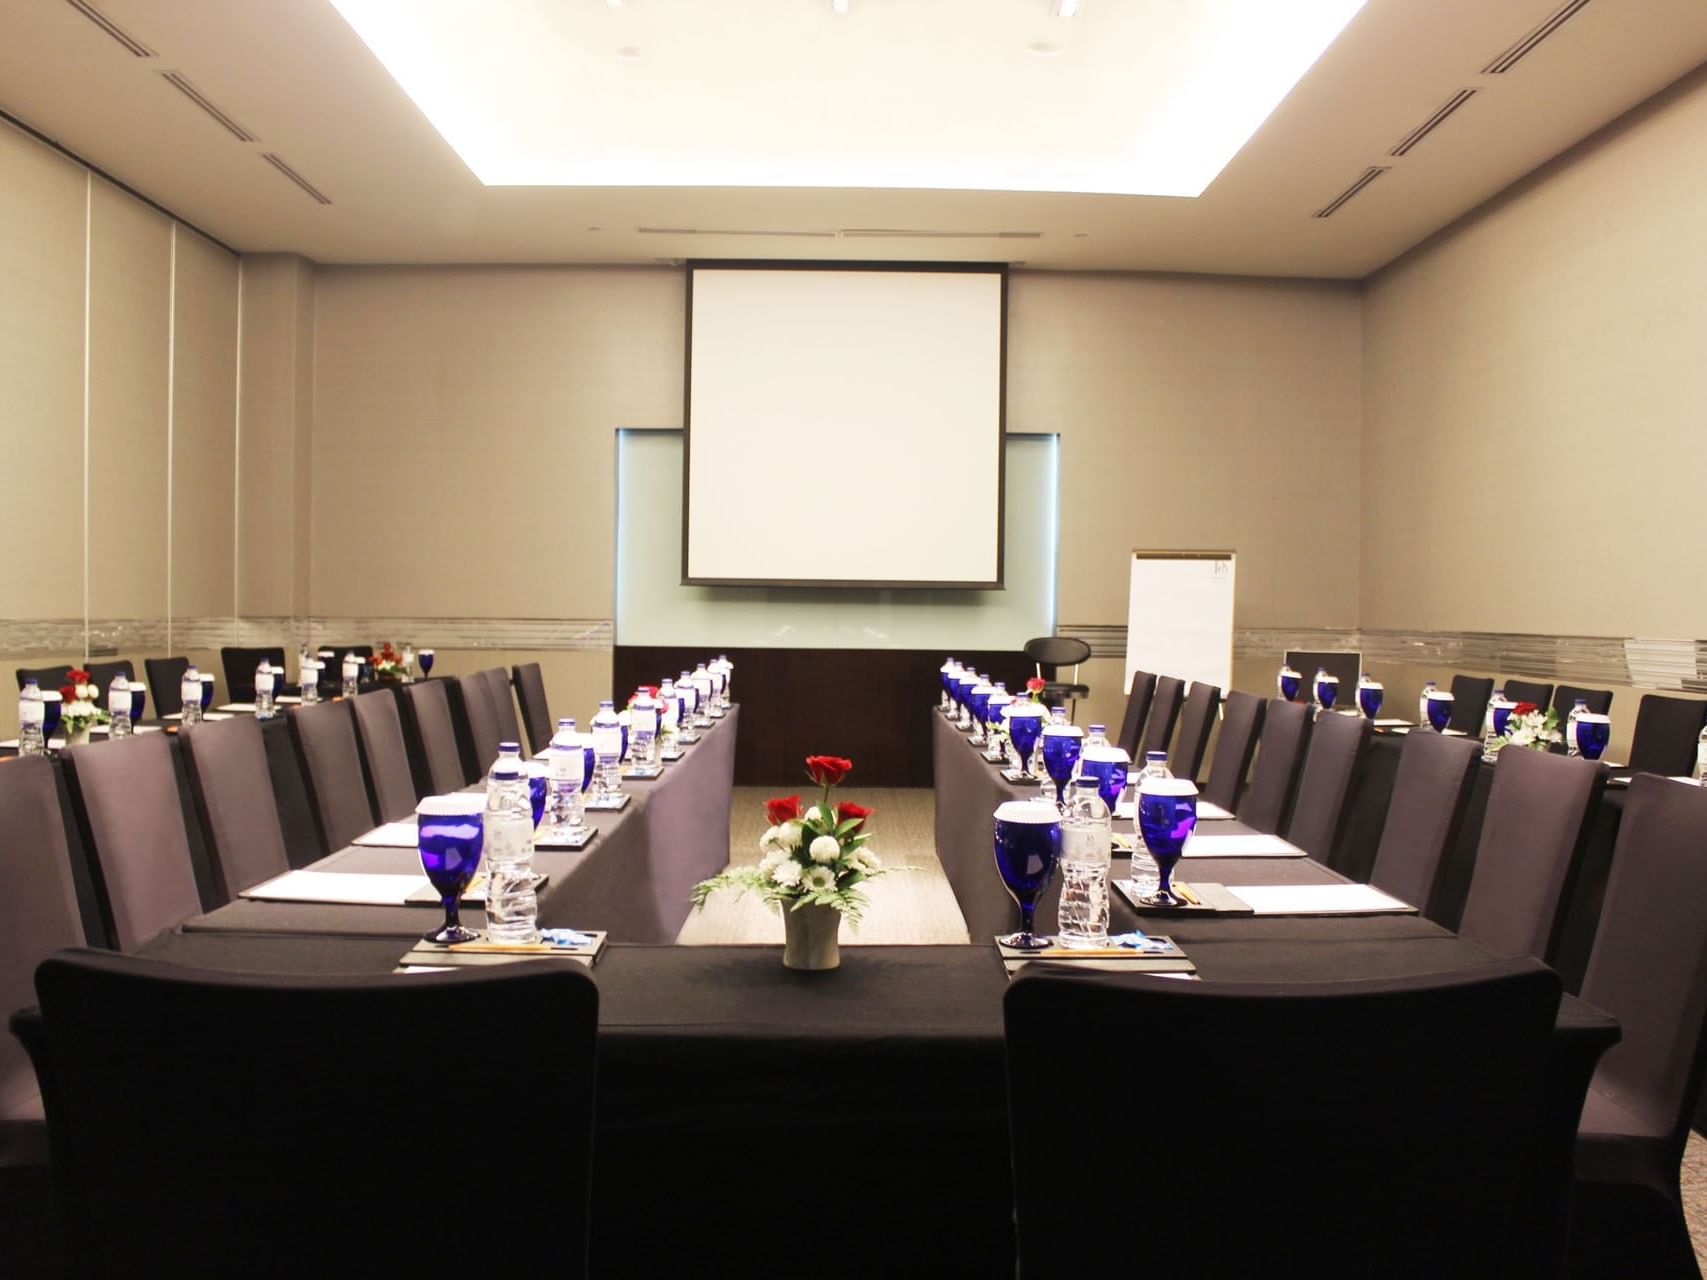 U shape tables arranged with projector screen in Meeting Room at Po Hotel Semarang